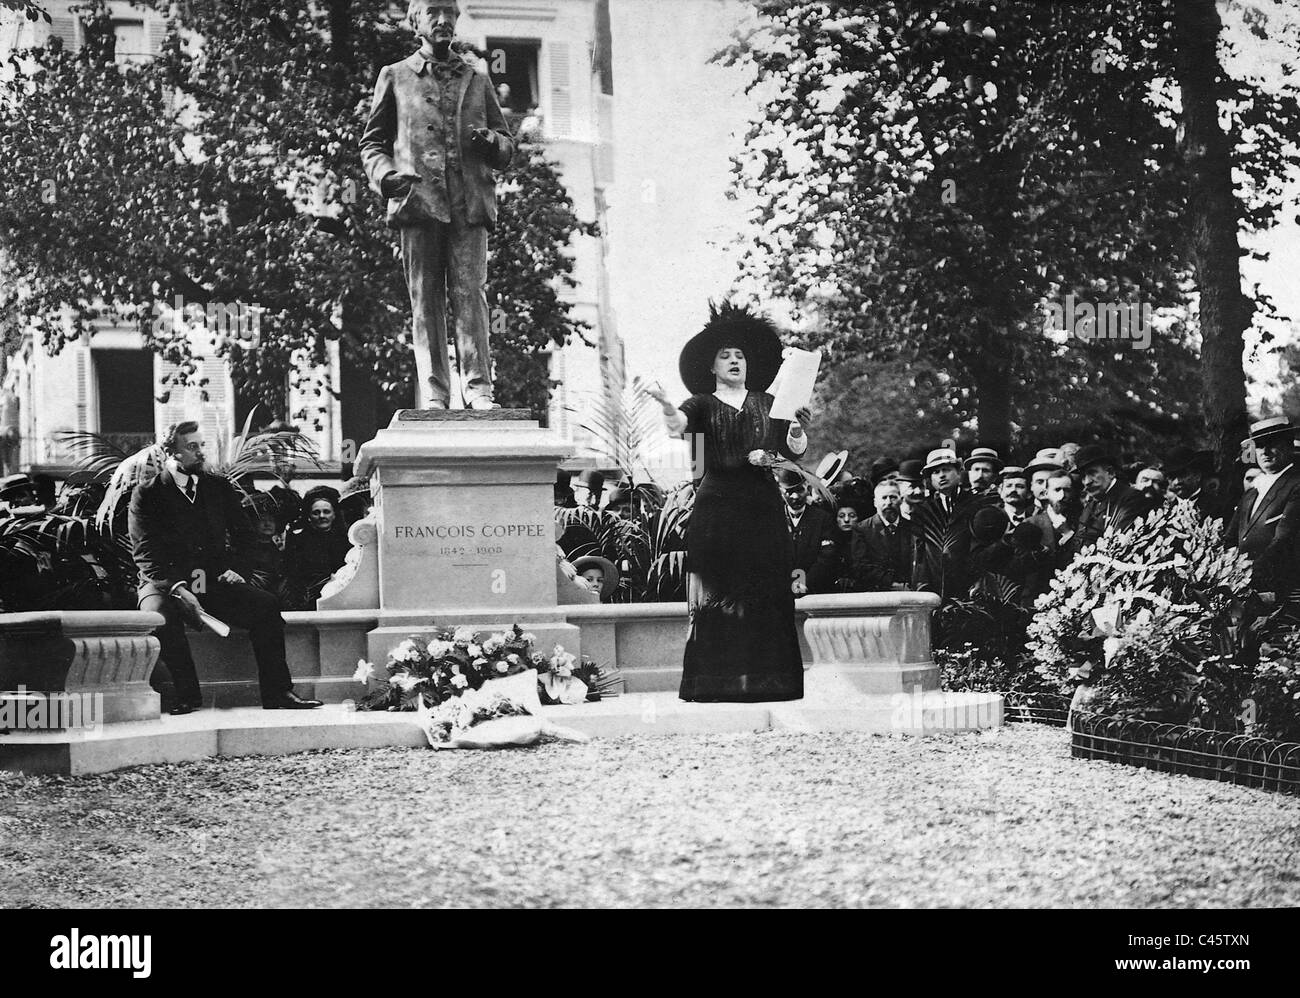 Unveiling of the memorial to Francois Coppee in Paris, 1910 Stock Photo